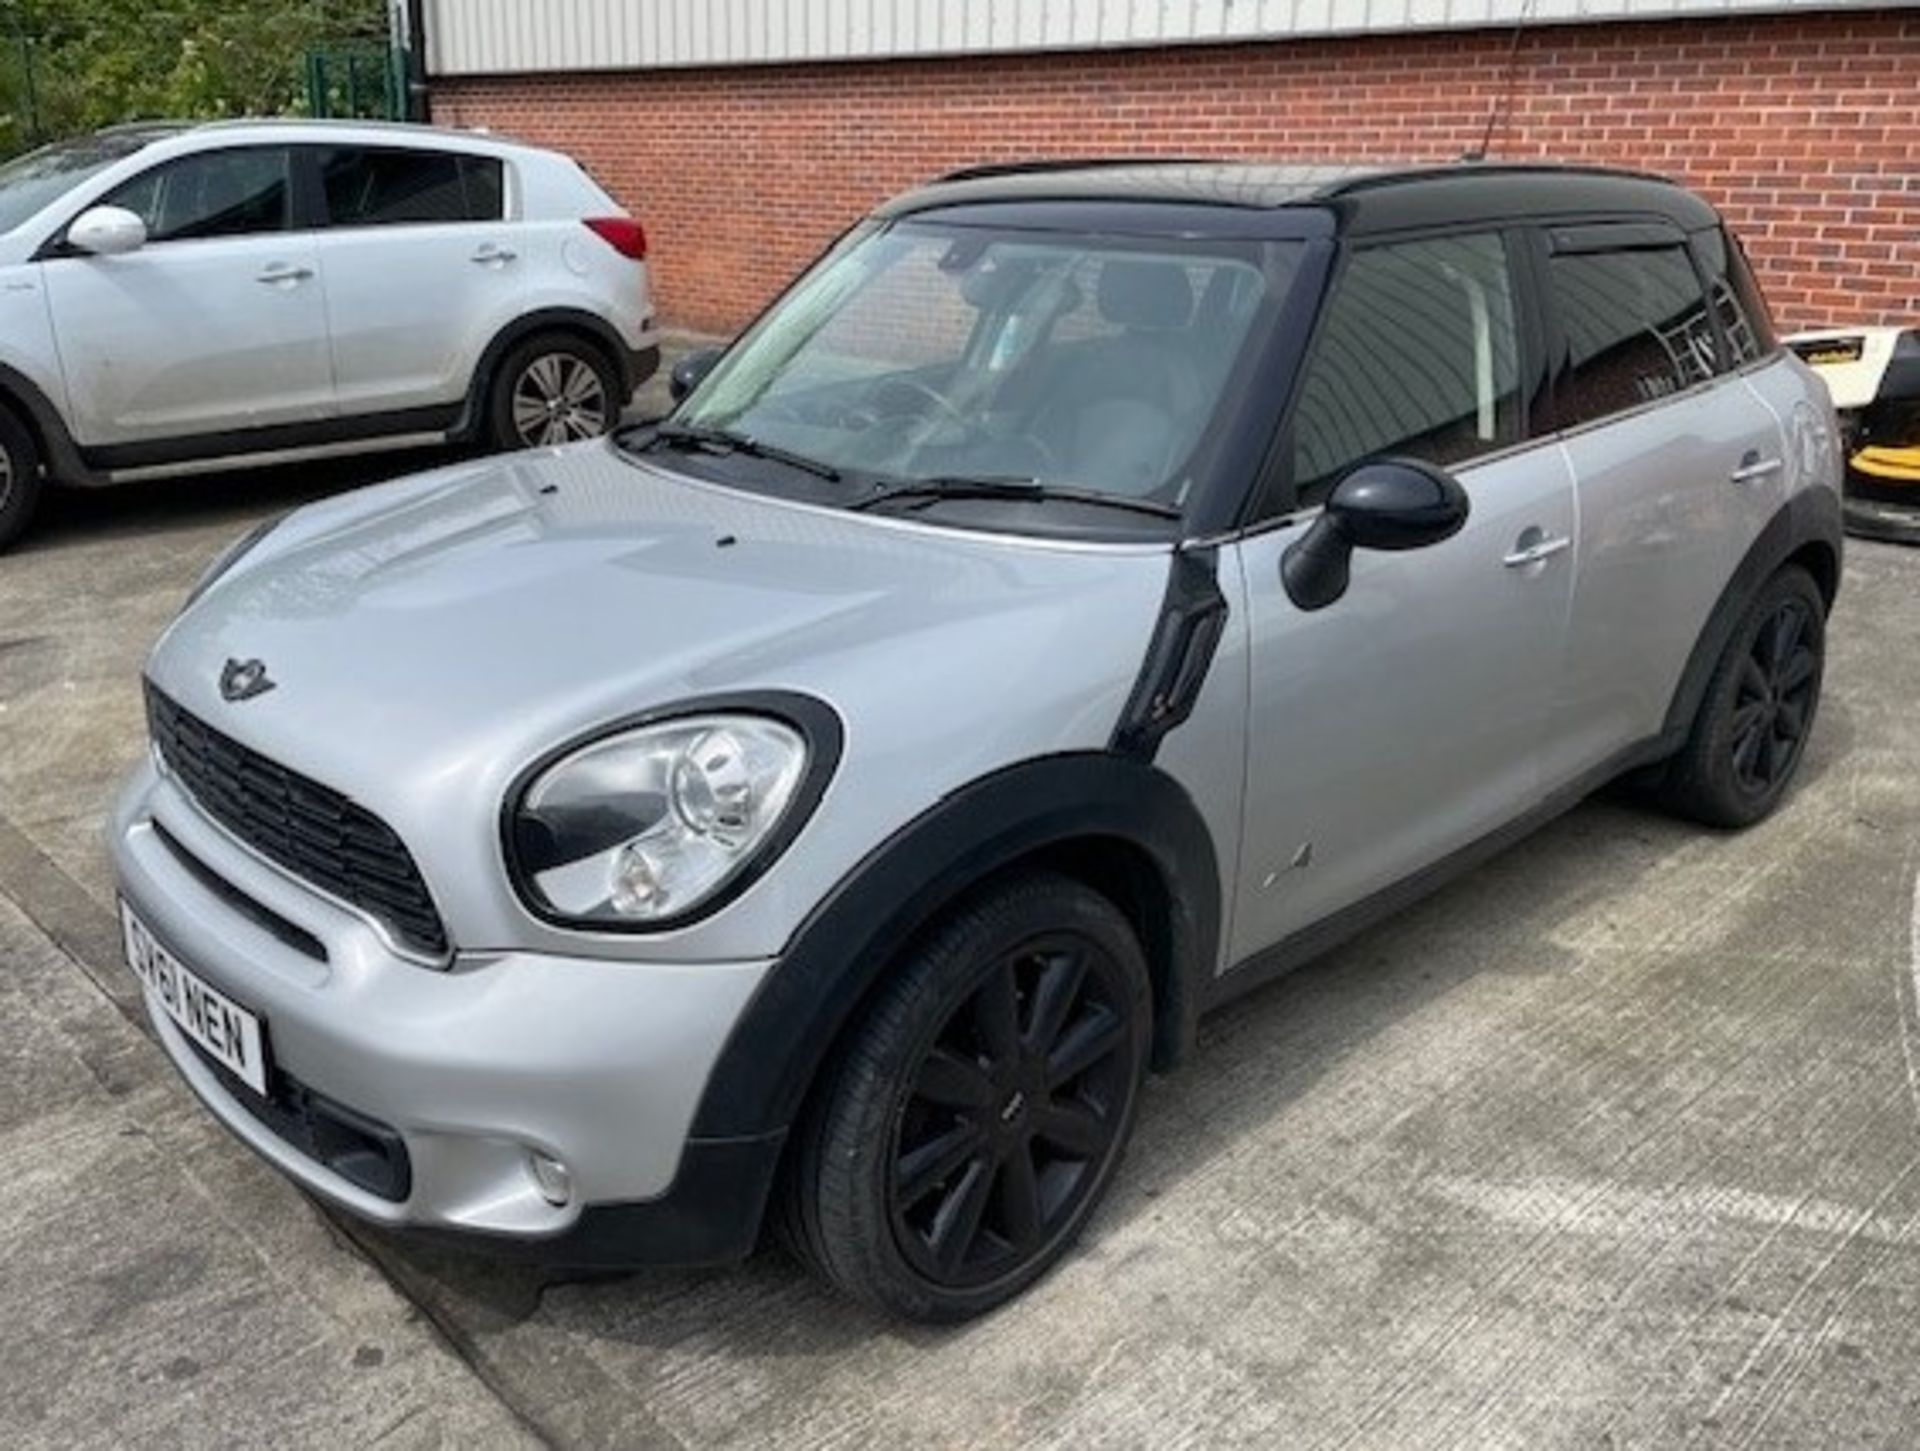 MINI COUNTRYMAN COOPER 2.0 SD ALL4 AUTOMATIC FIVE DOOR HATCHBACK - Diesel - Silver. - Image 3 of 9